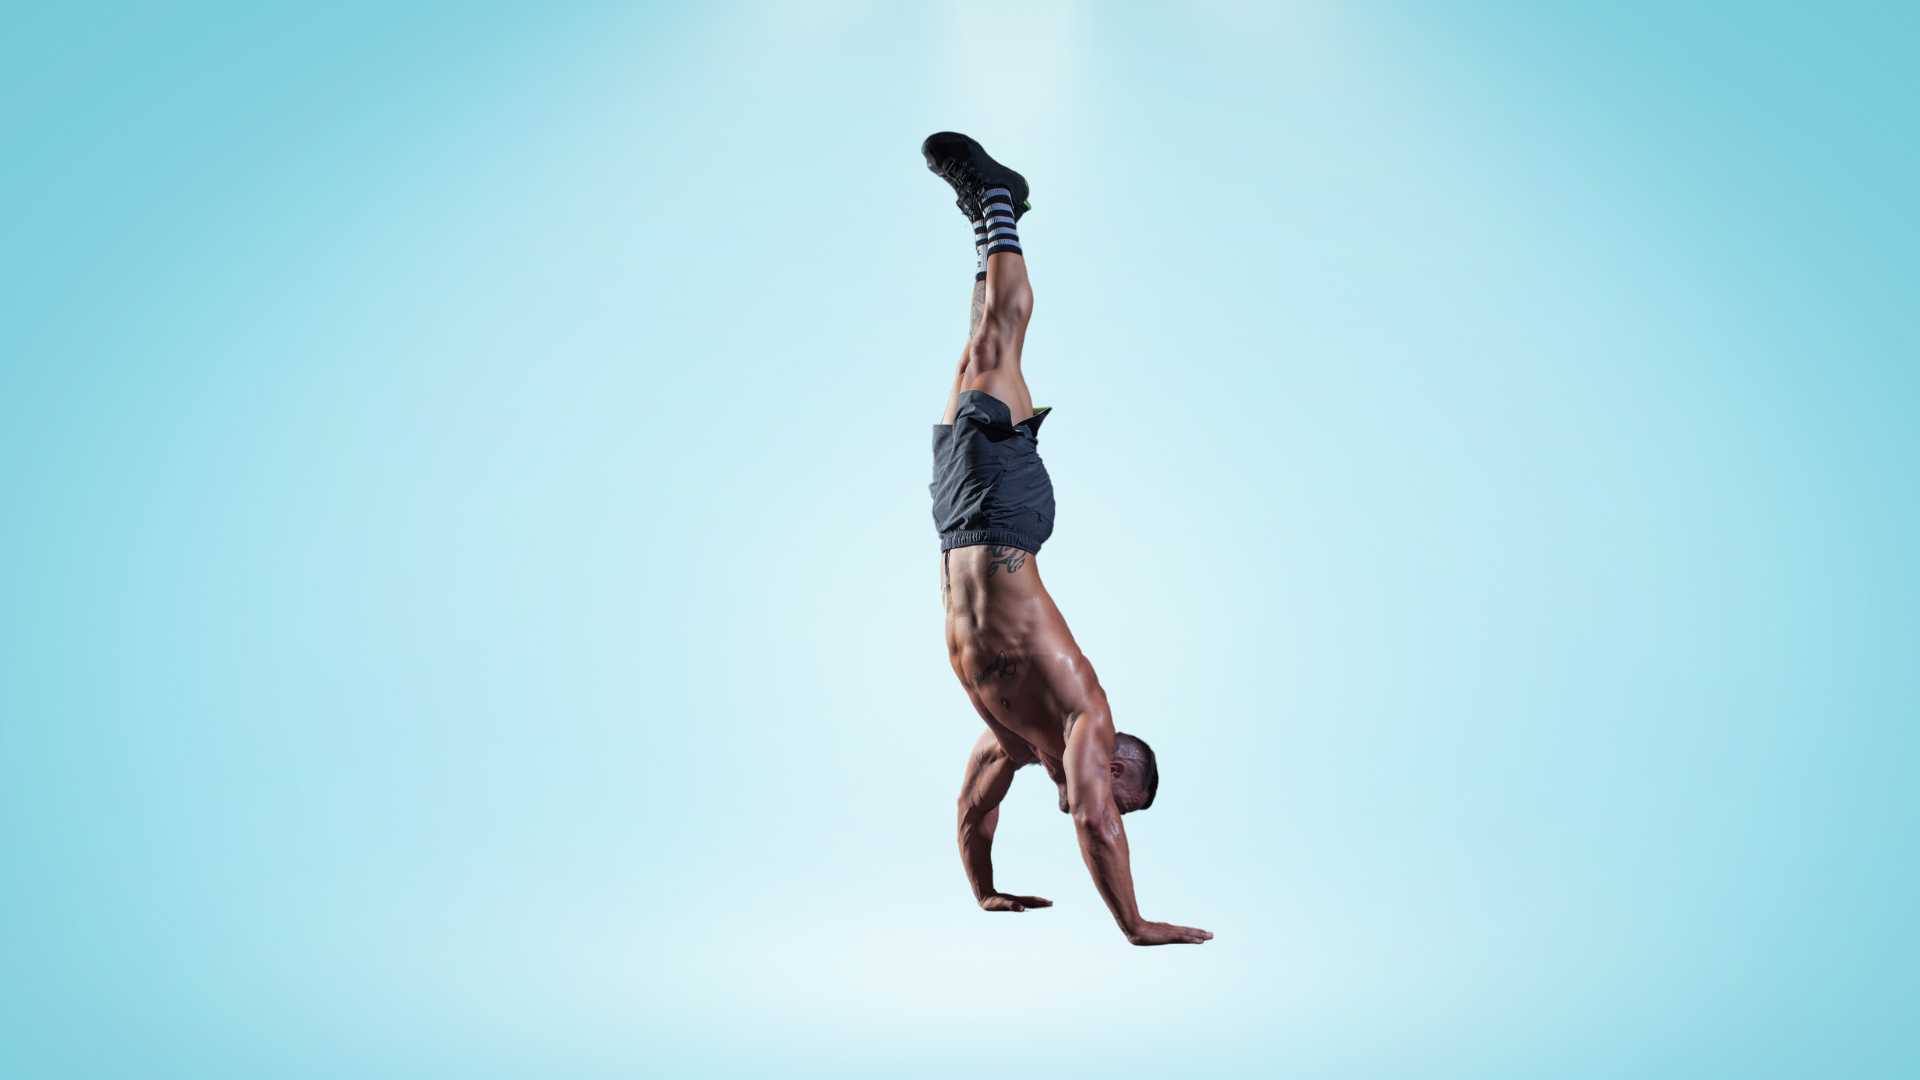 How Long Does It Take To Learn A Handstand